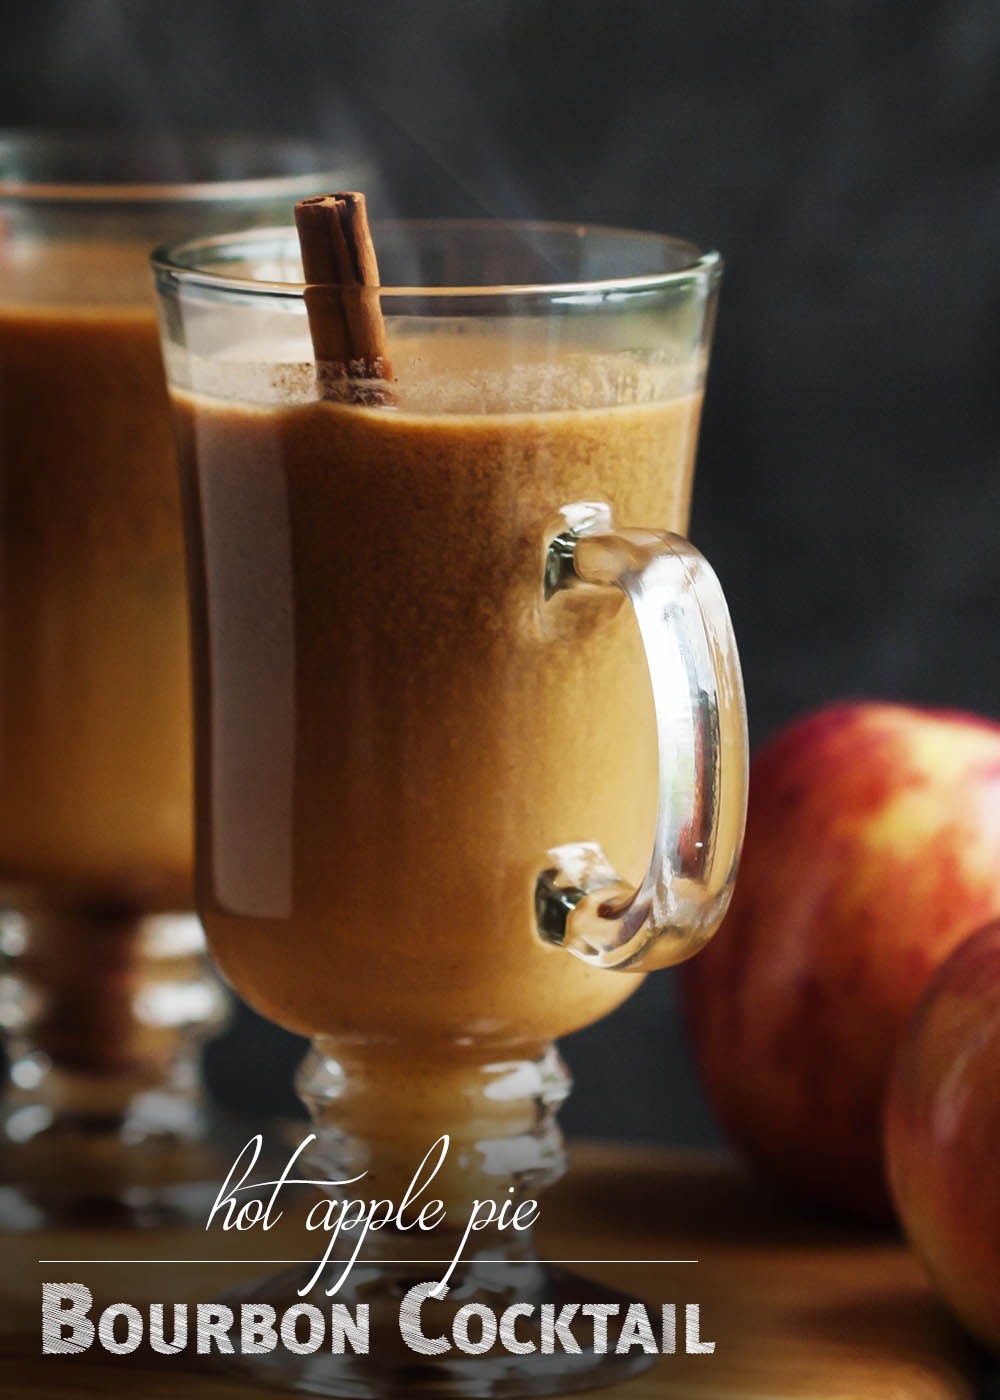 Hot Apple Pie Bourbon Cocktail - This twist on hot buttered bourbon uses cider and butterscotch sauce to make the perfect thanksgiving or fall cocktail. | justalittlebitofbacon.com